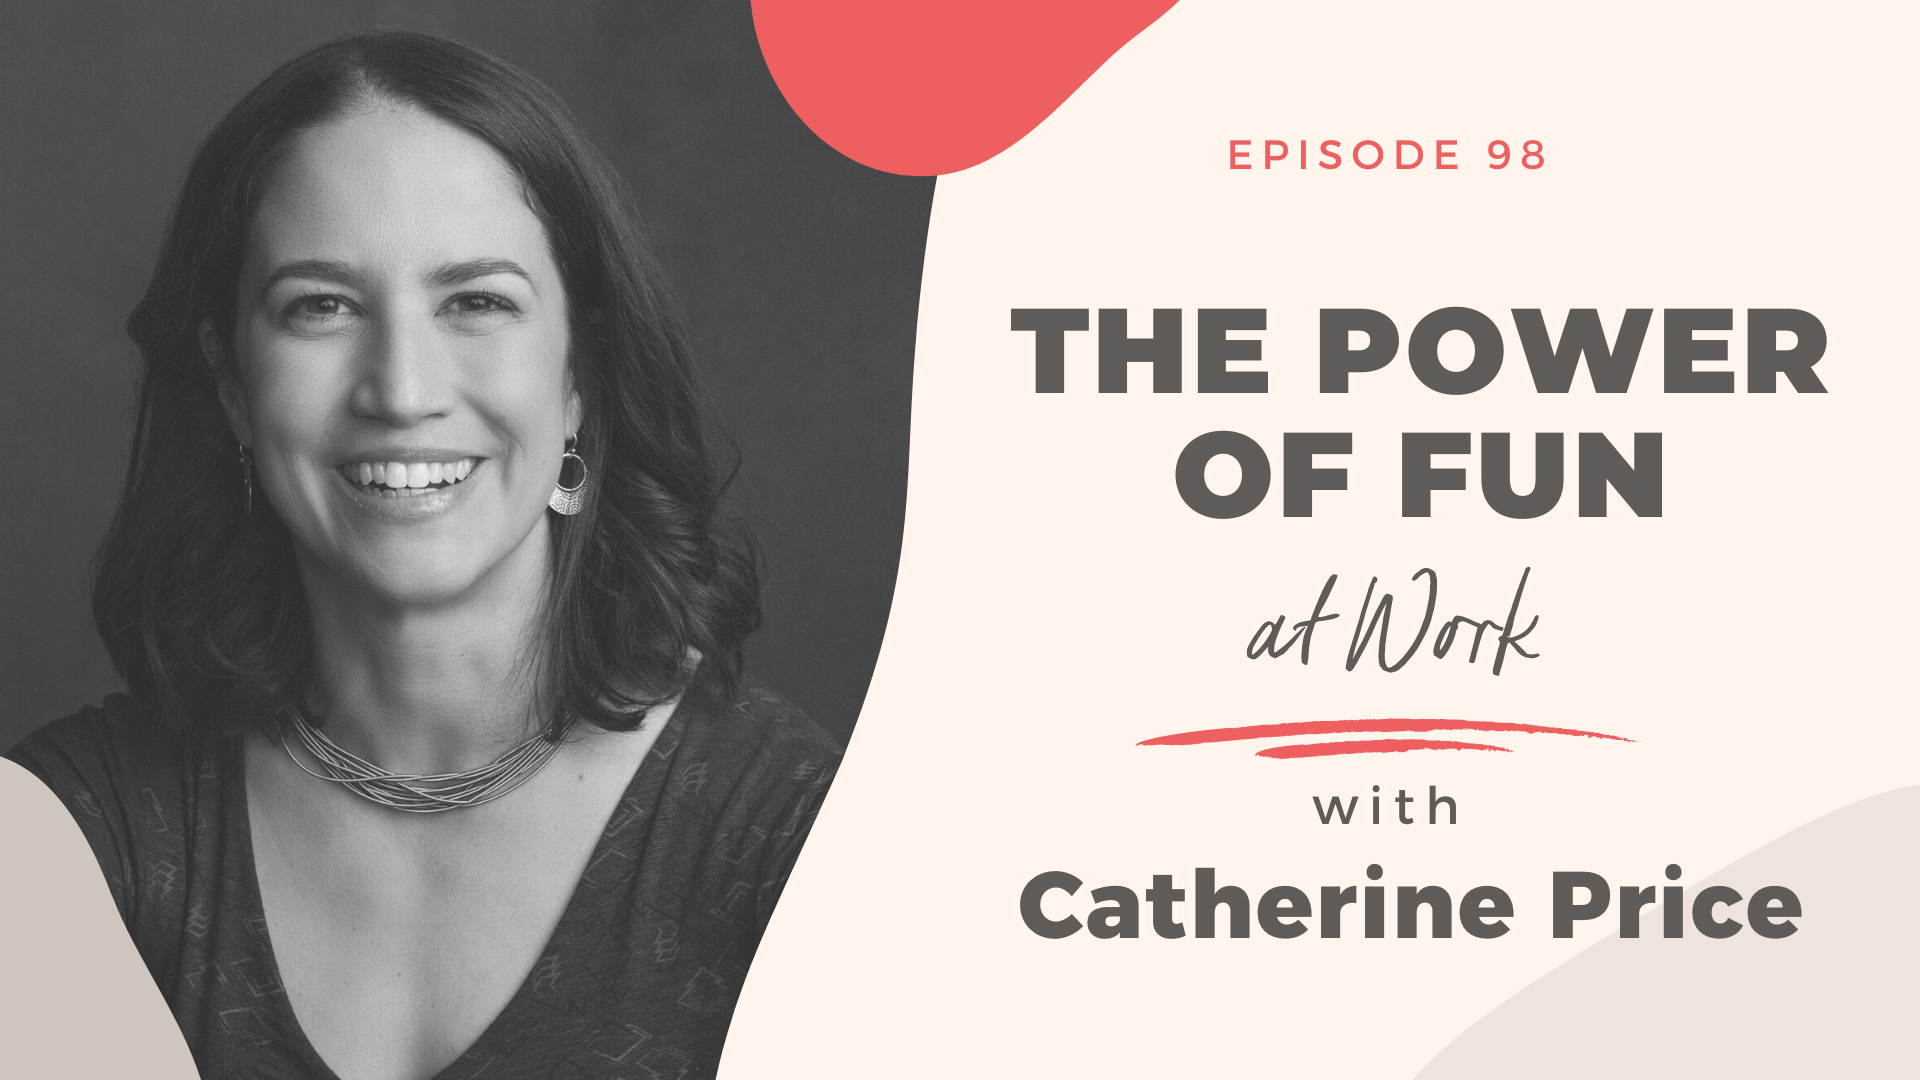 Catherine Price at the CultureLab podcast